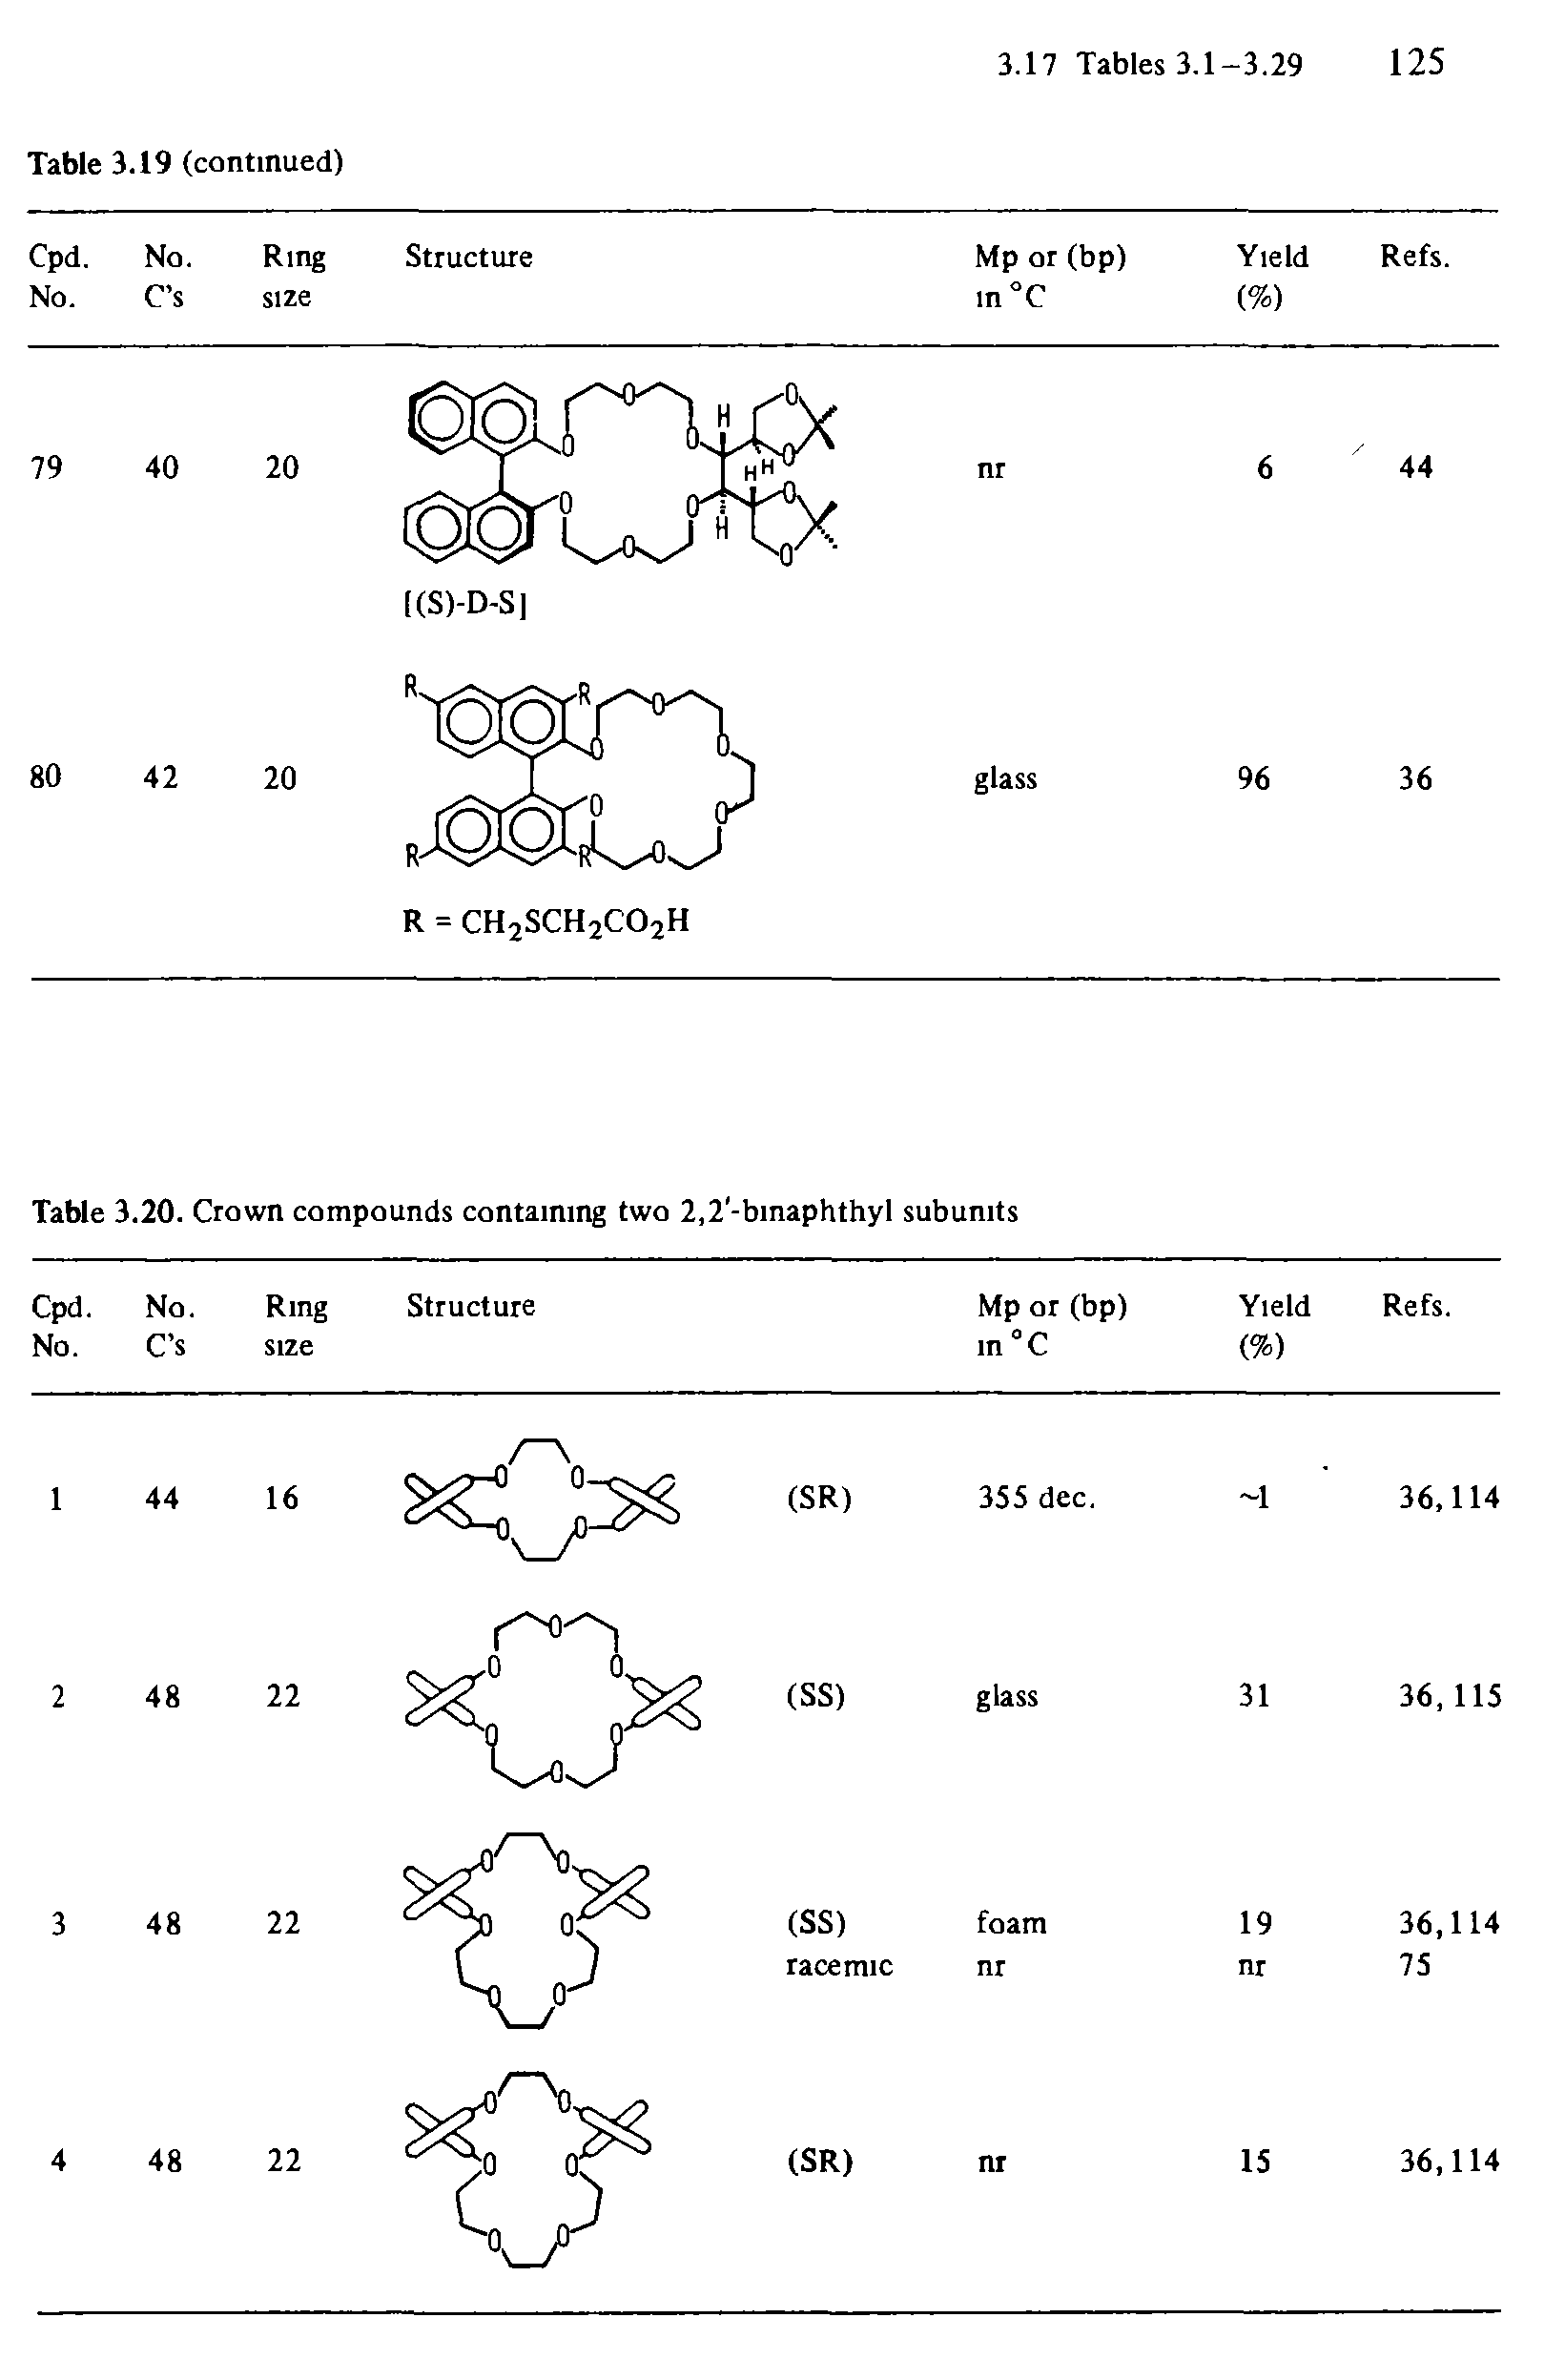 Table 3.20. Crown compounds containing two 2,2 -binaphthyl subunits...